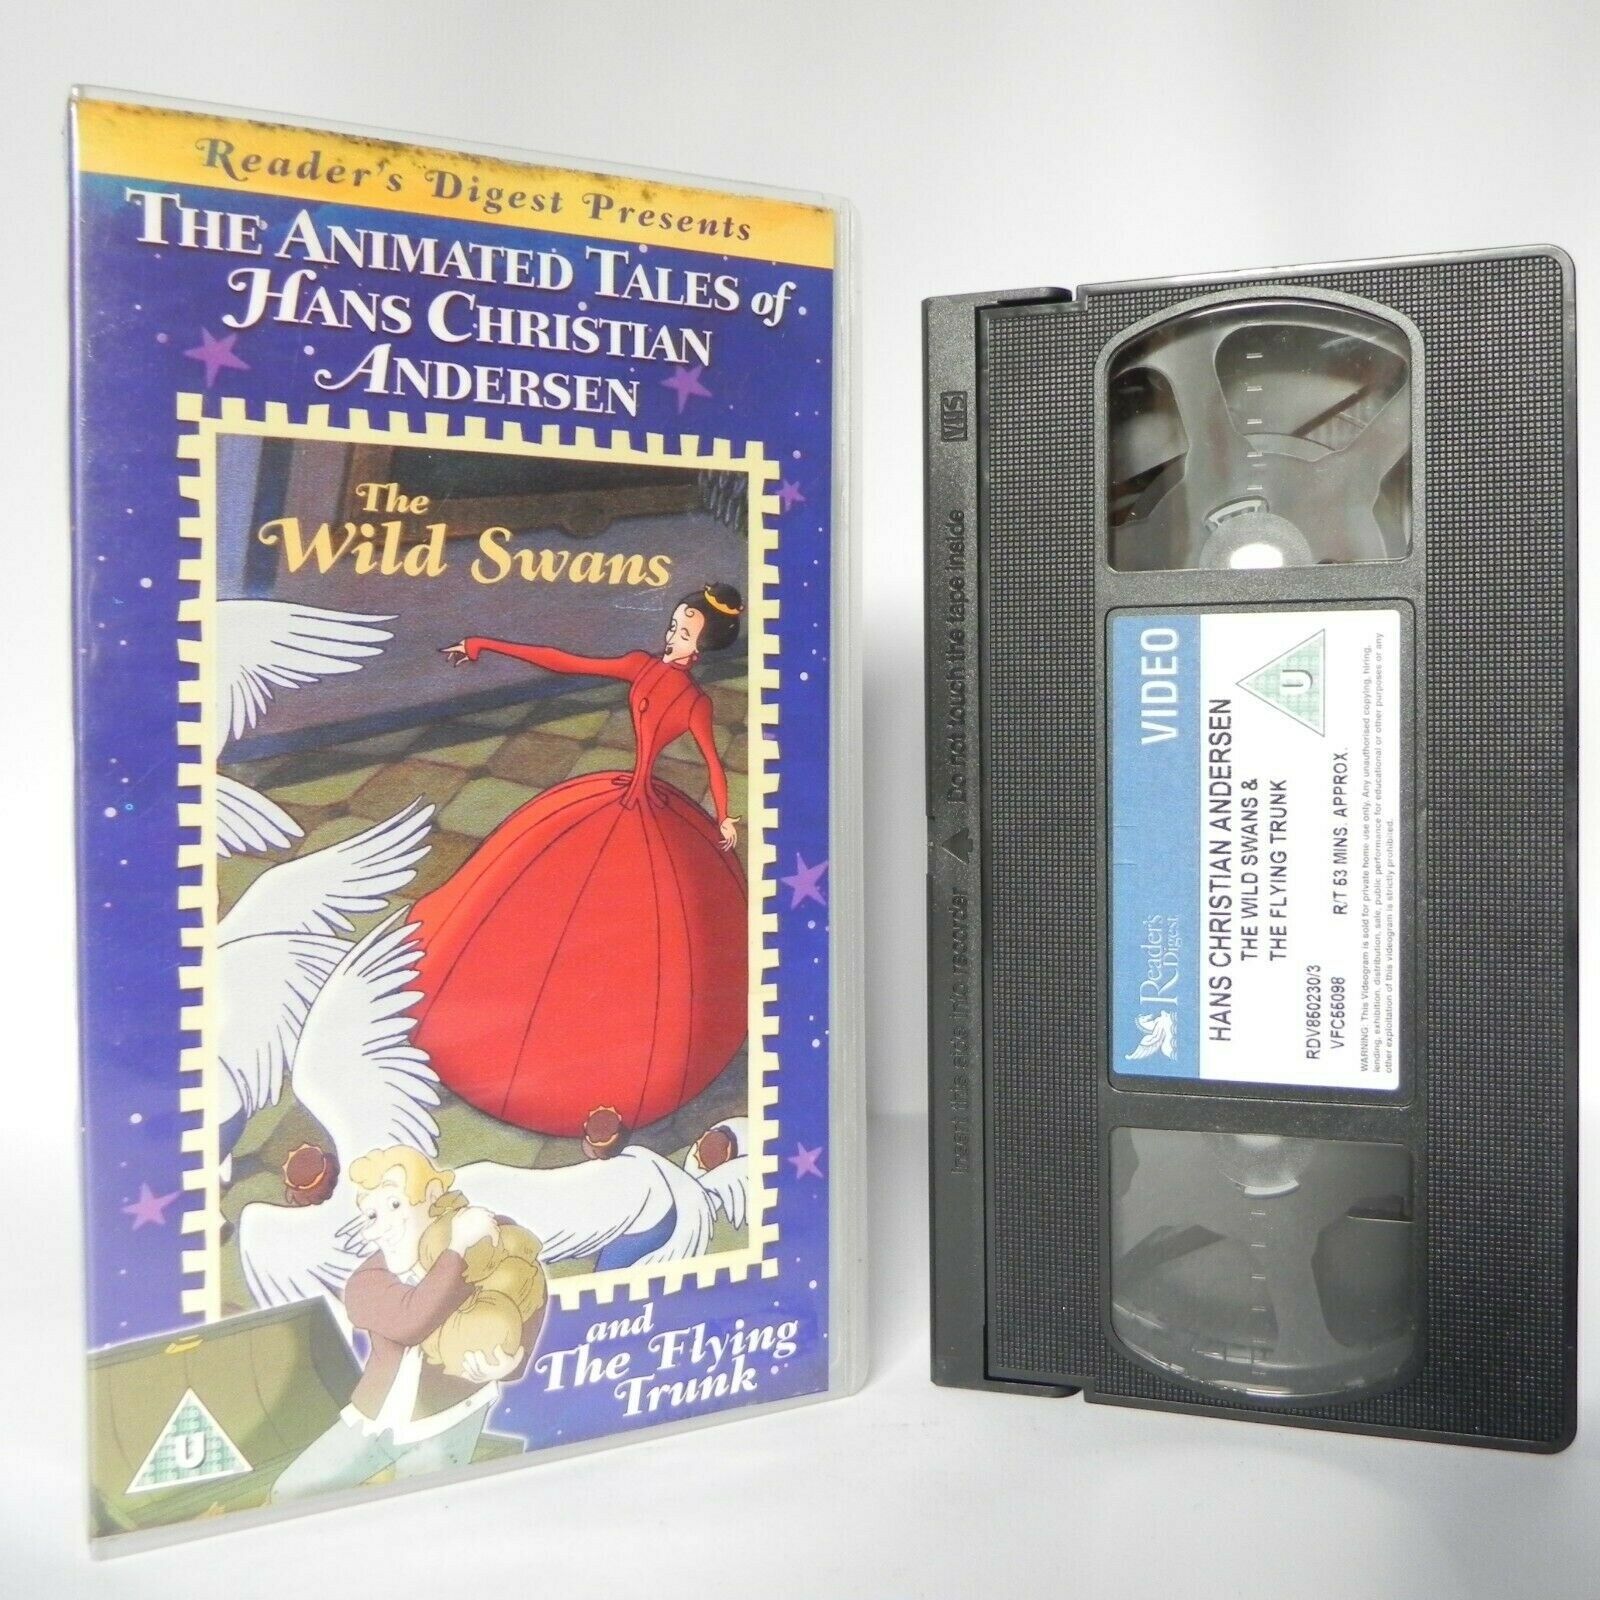 The Wild Swans - Hans Christian Andersen - Animated Tales - Children's - VHS-